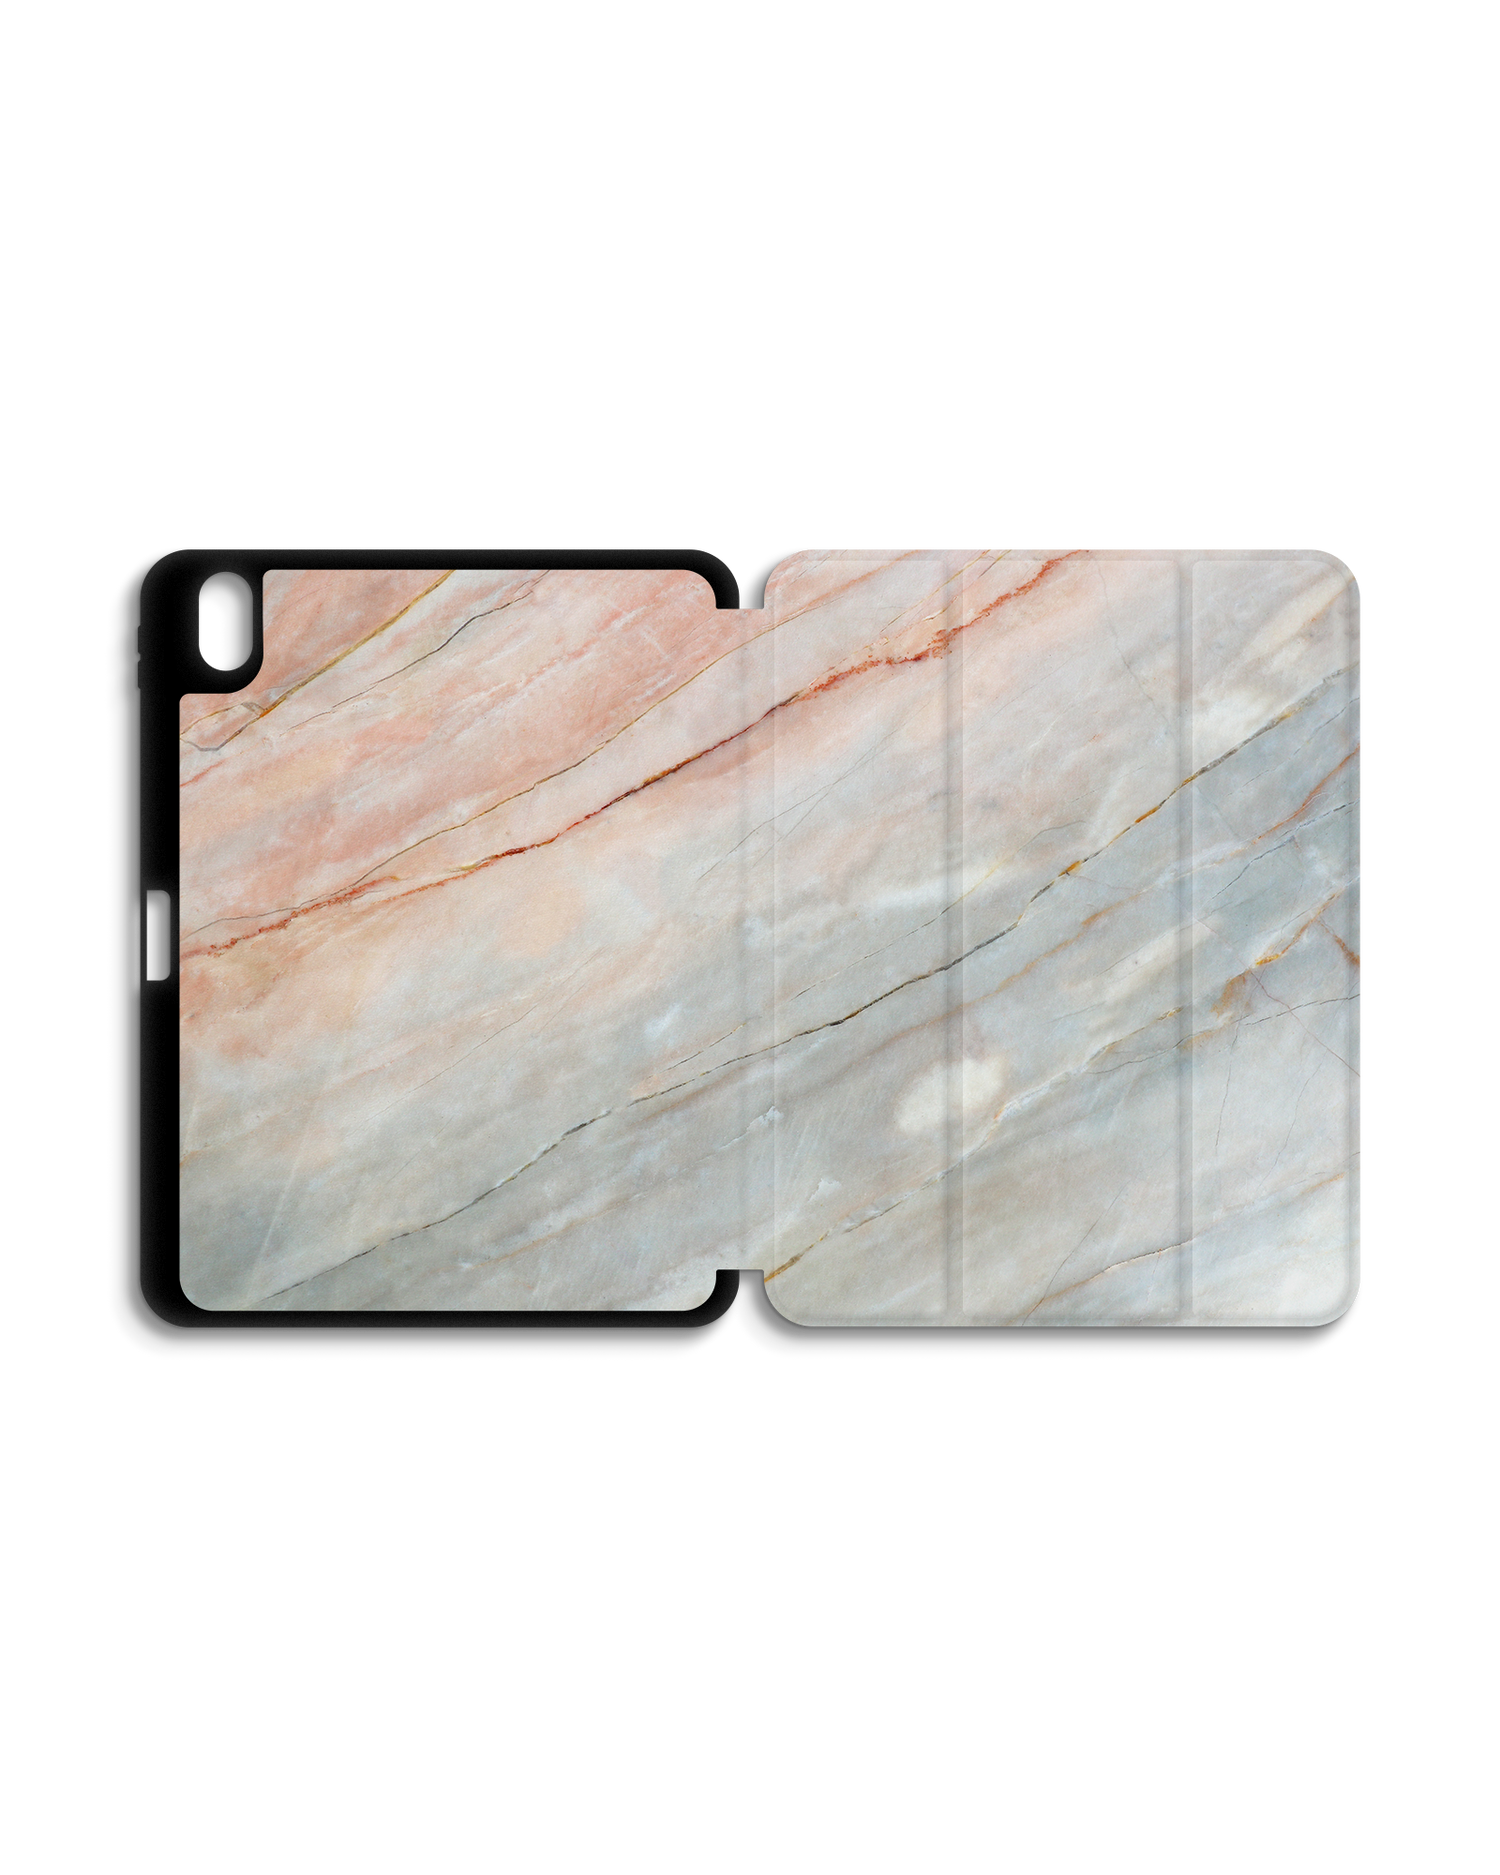 Mother of Pearl Marble iPad Case with Pencil Holder for Apple iPad (10th Generation): Opened exterior view